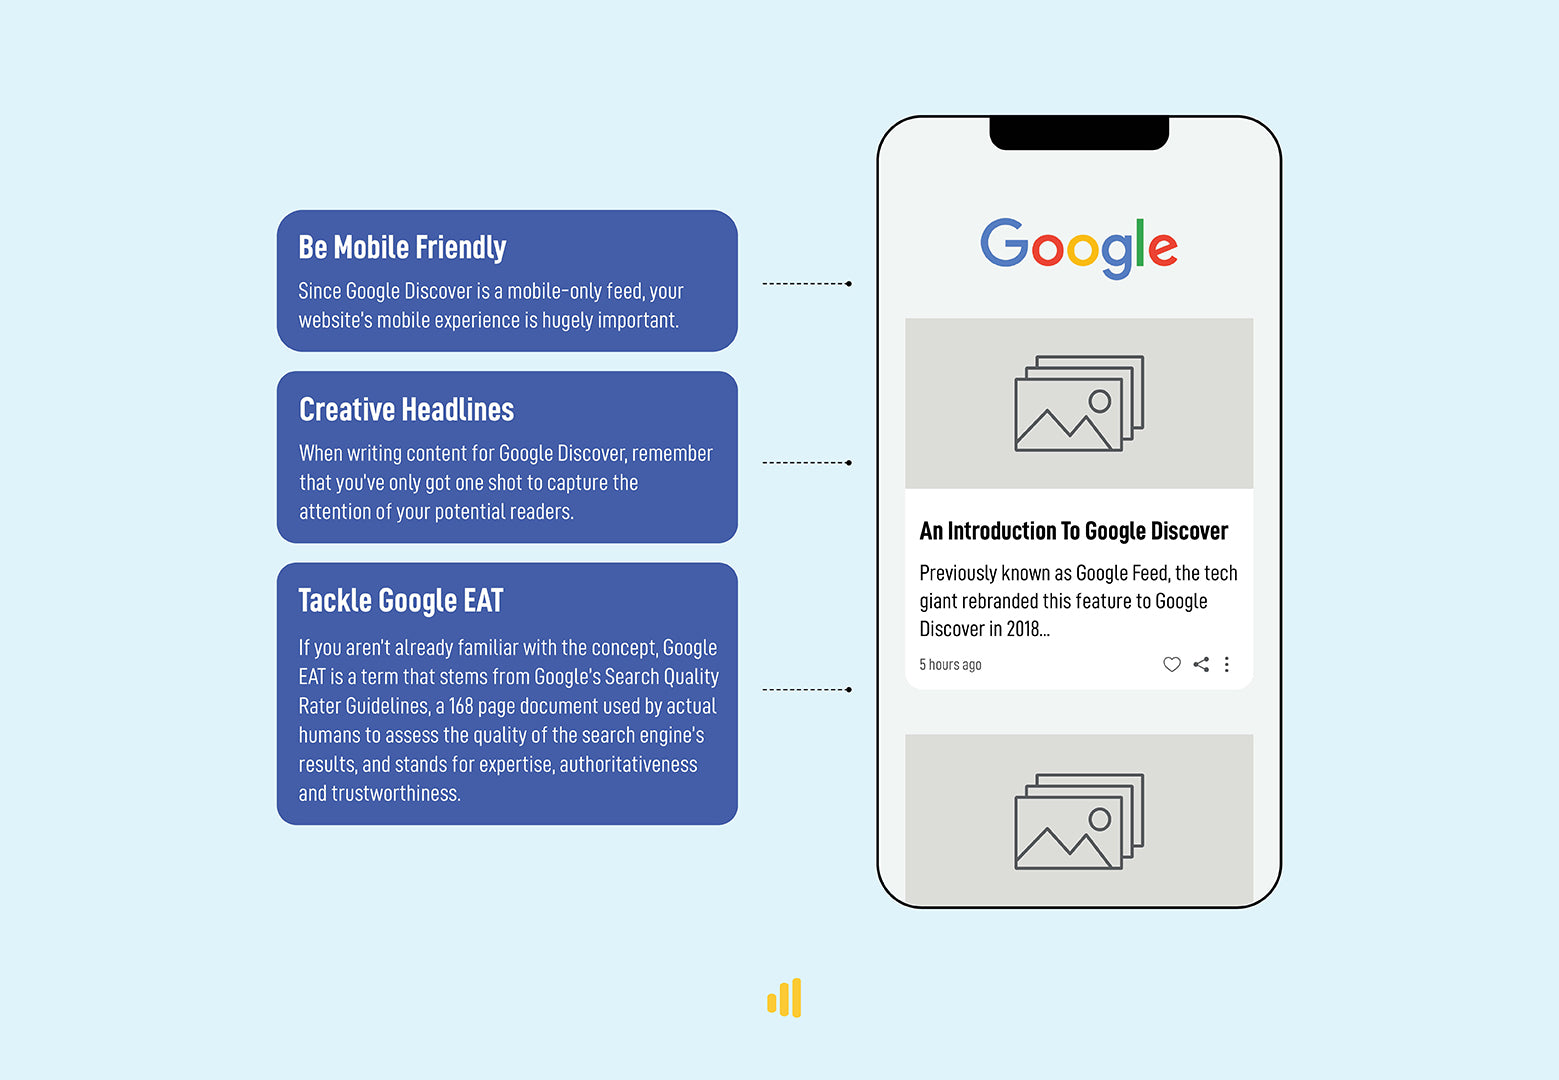  An-Introduction-To-Google-Discover.jpg